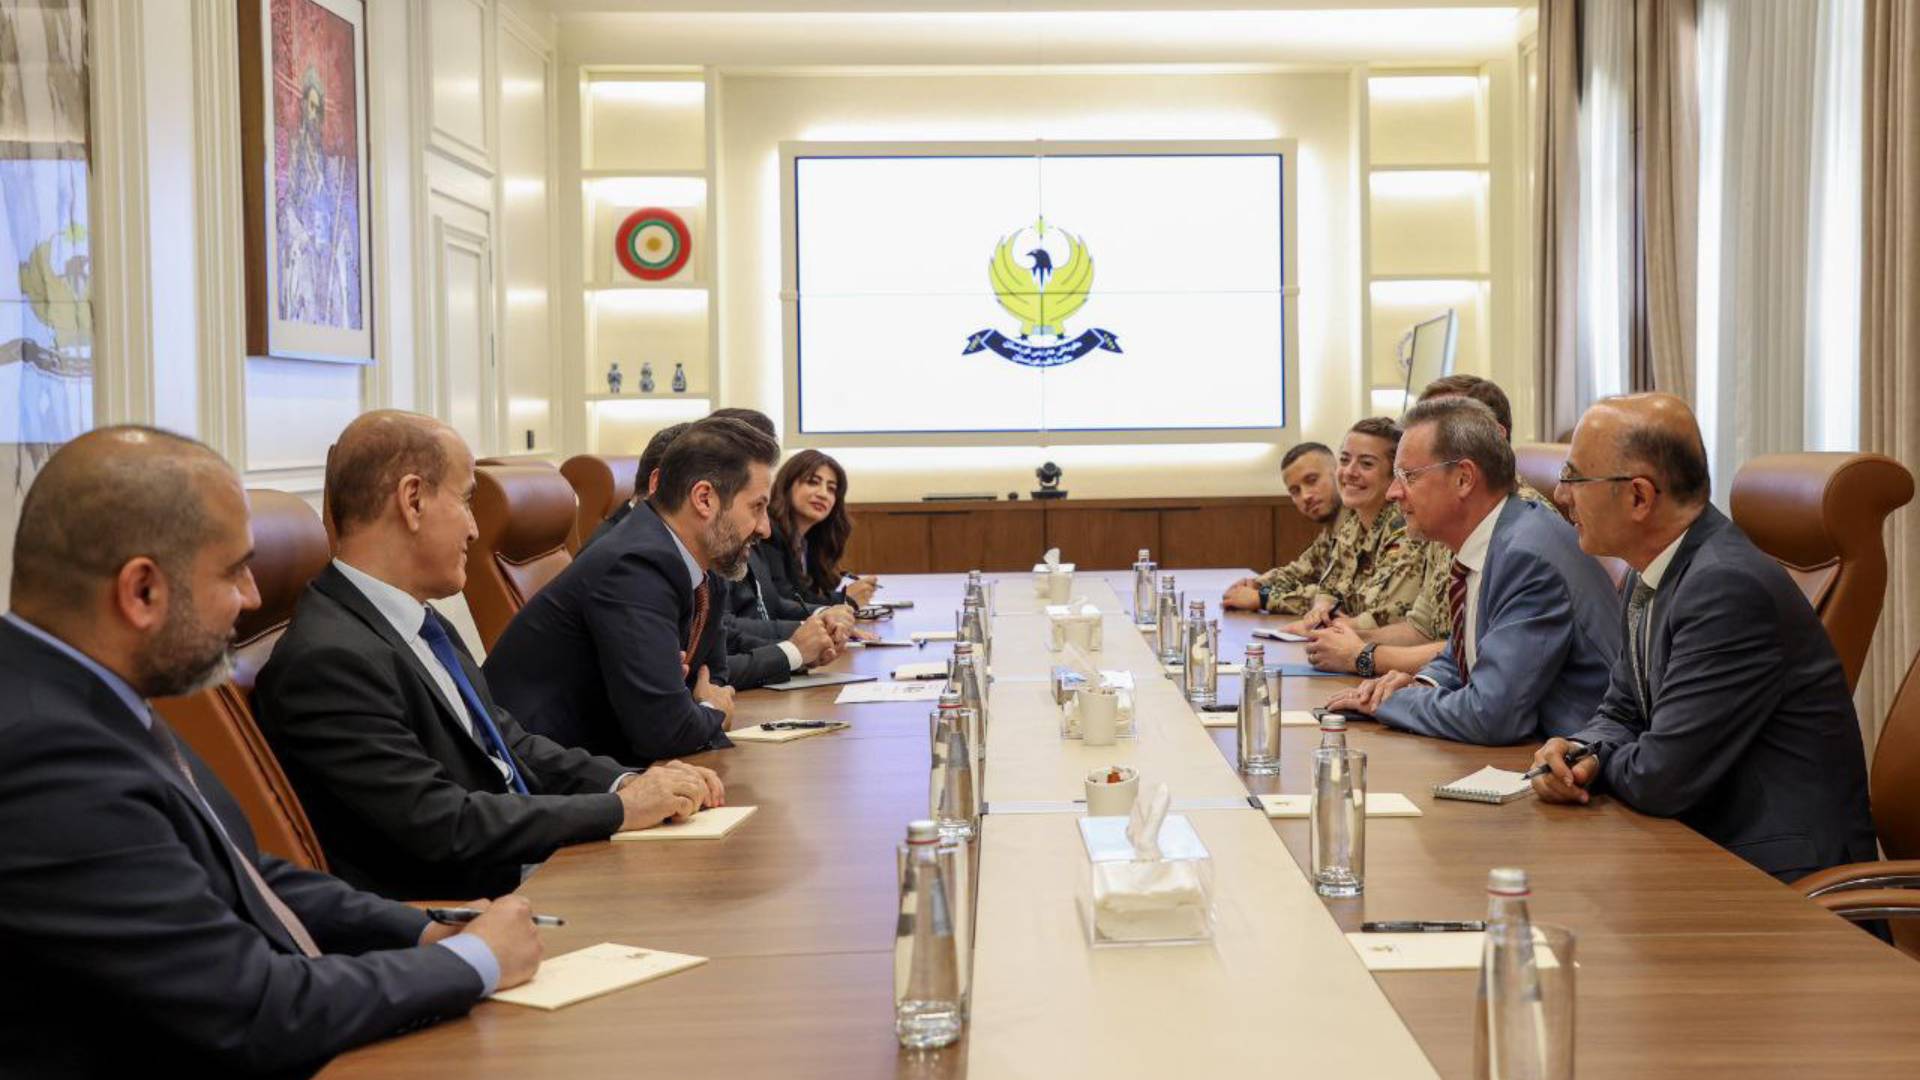 KRG Deputy PM Qubad Talabani and Colonel Lars Persikowsk, commander of the German forces in the Kurdistan Region.